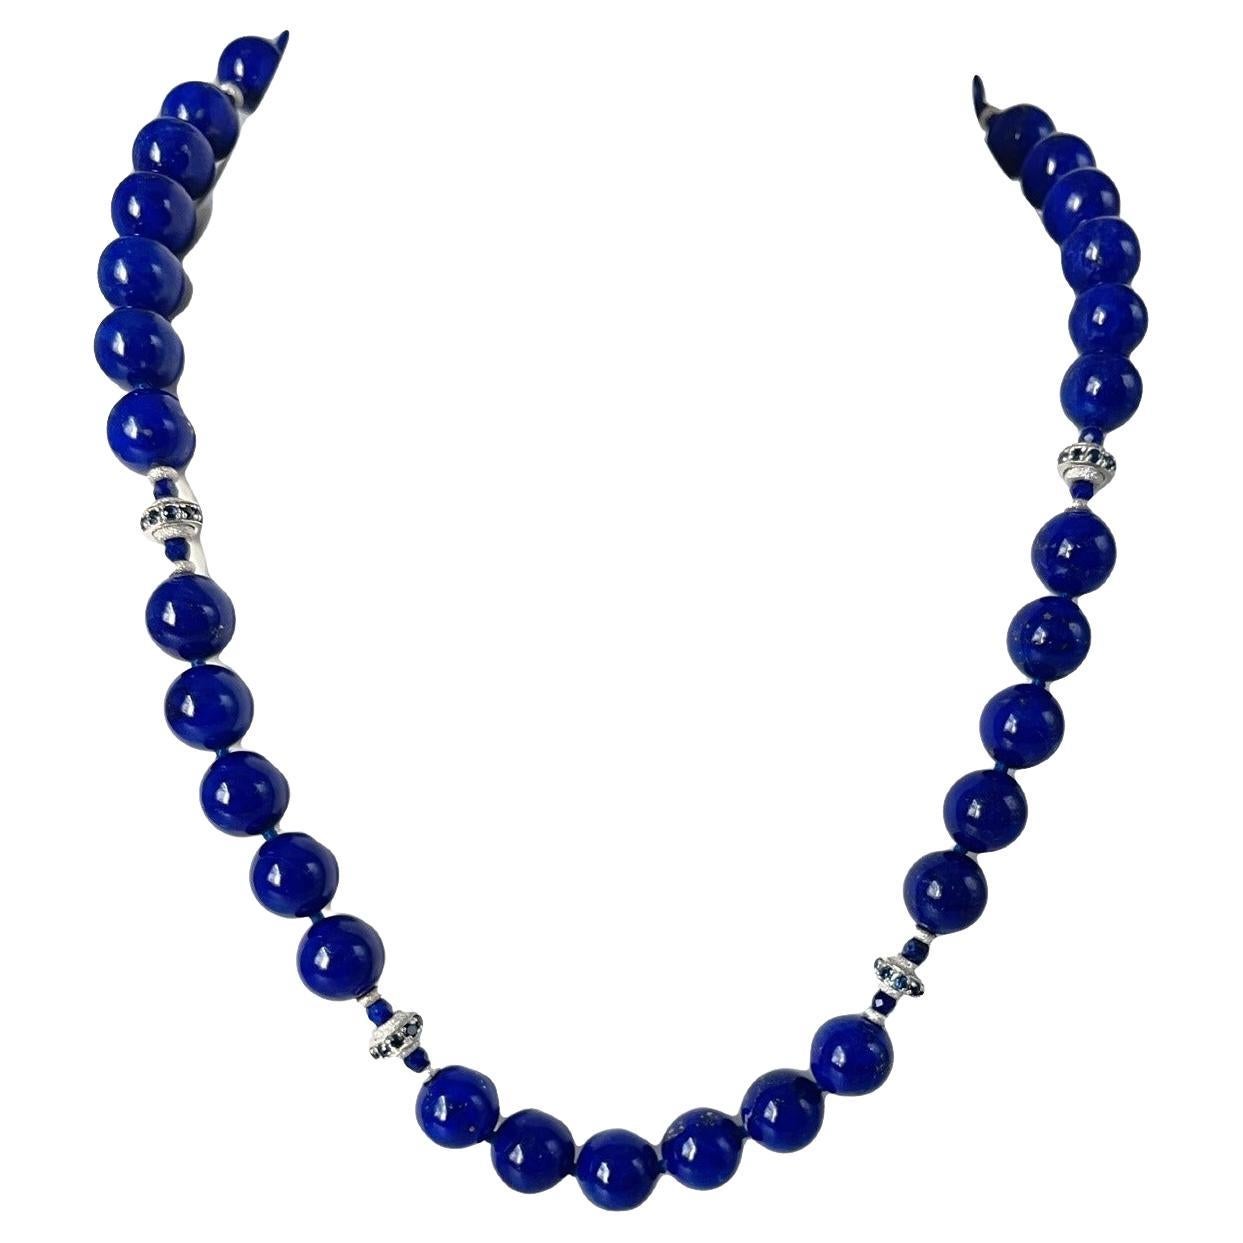 This gorgeous necklace of round lapis lazuli beads with sapphire and white gold accents is the epitome of style and sophistication! 10mm round, beautifully matched lapis with their high-polish and stunning royal blue color have been arranged with